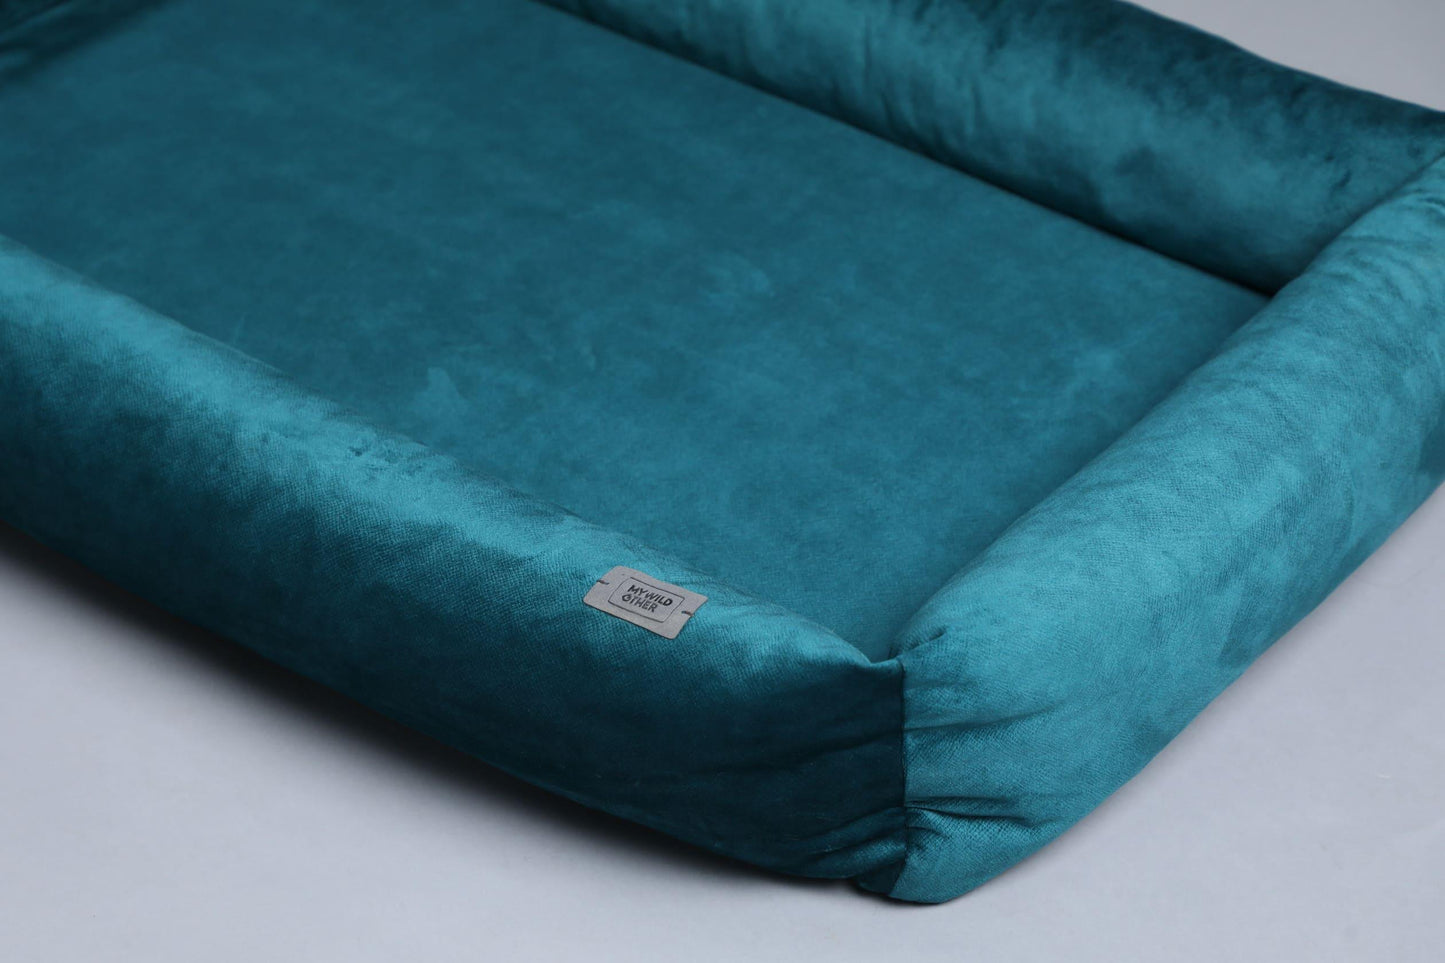 2-sided classic dog bed. OCEAN BLUE - European handmade dog accessories by My Wild Other